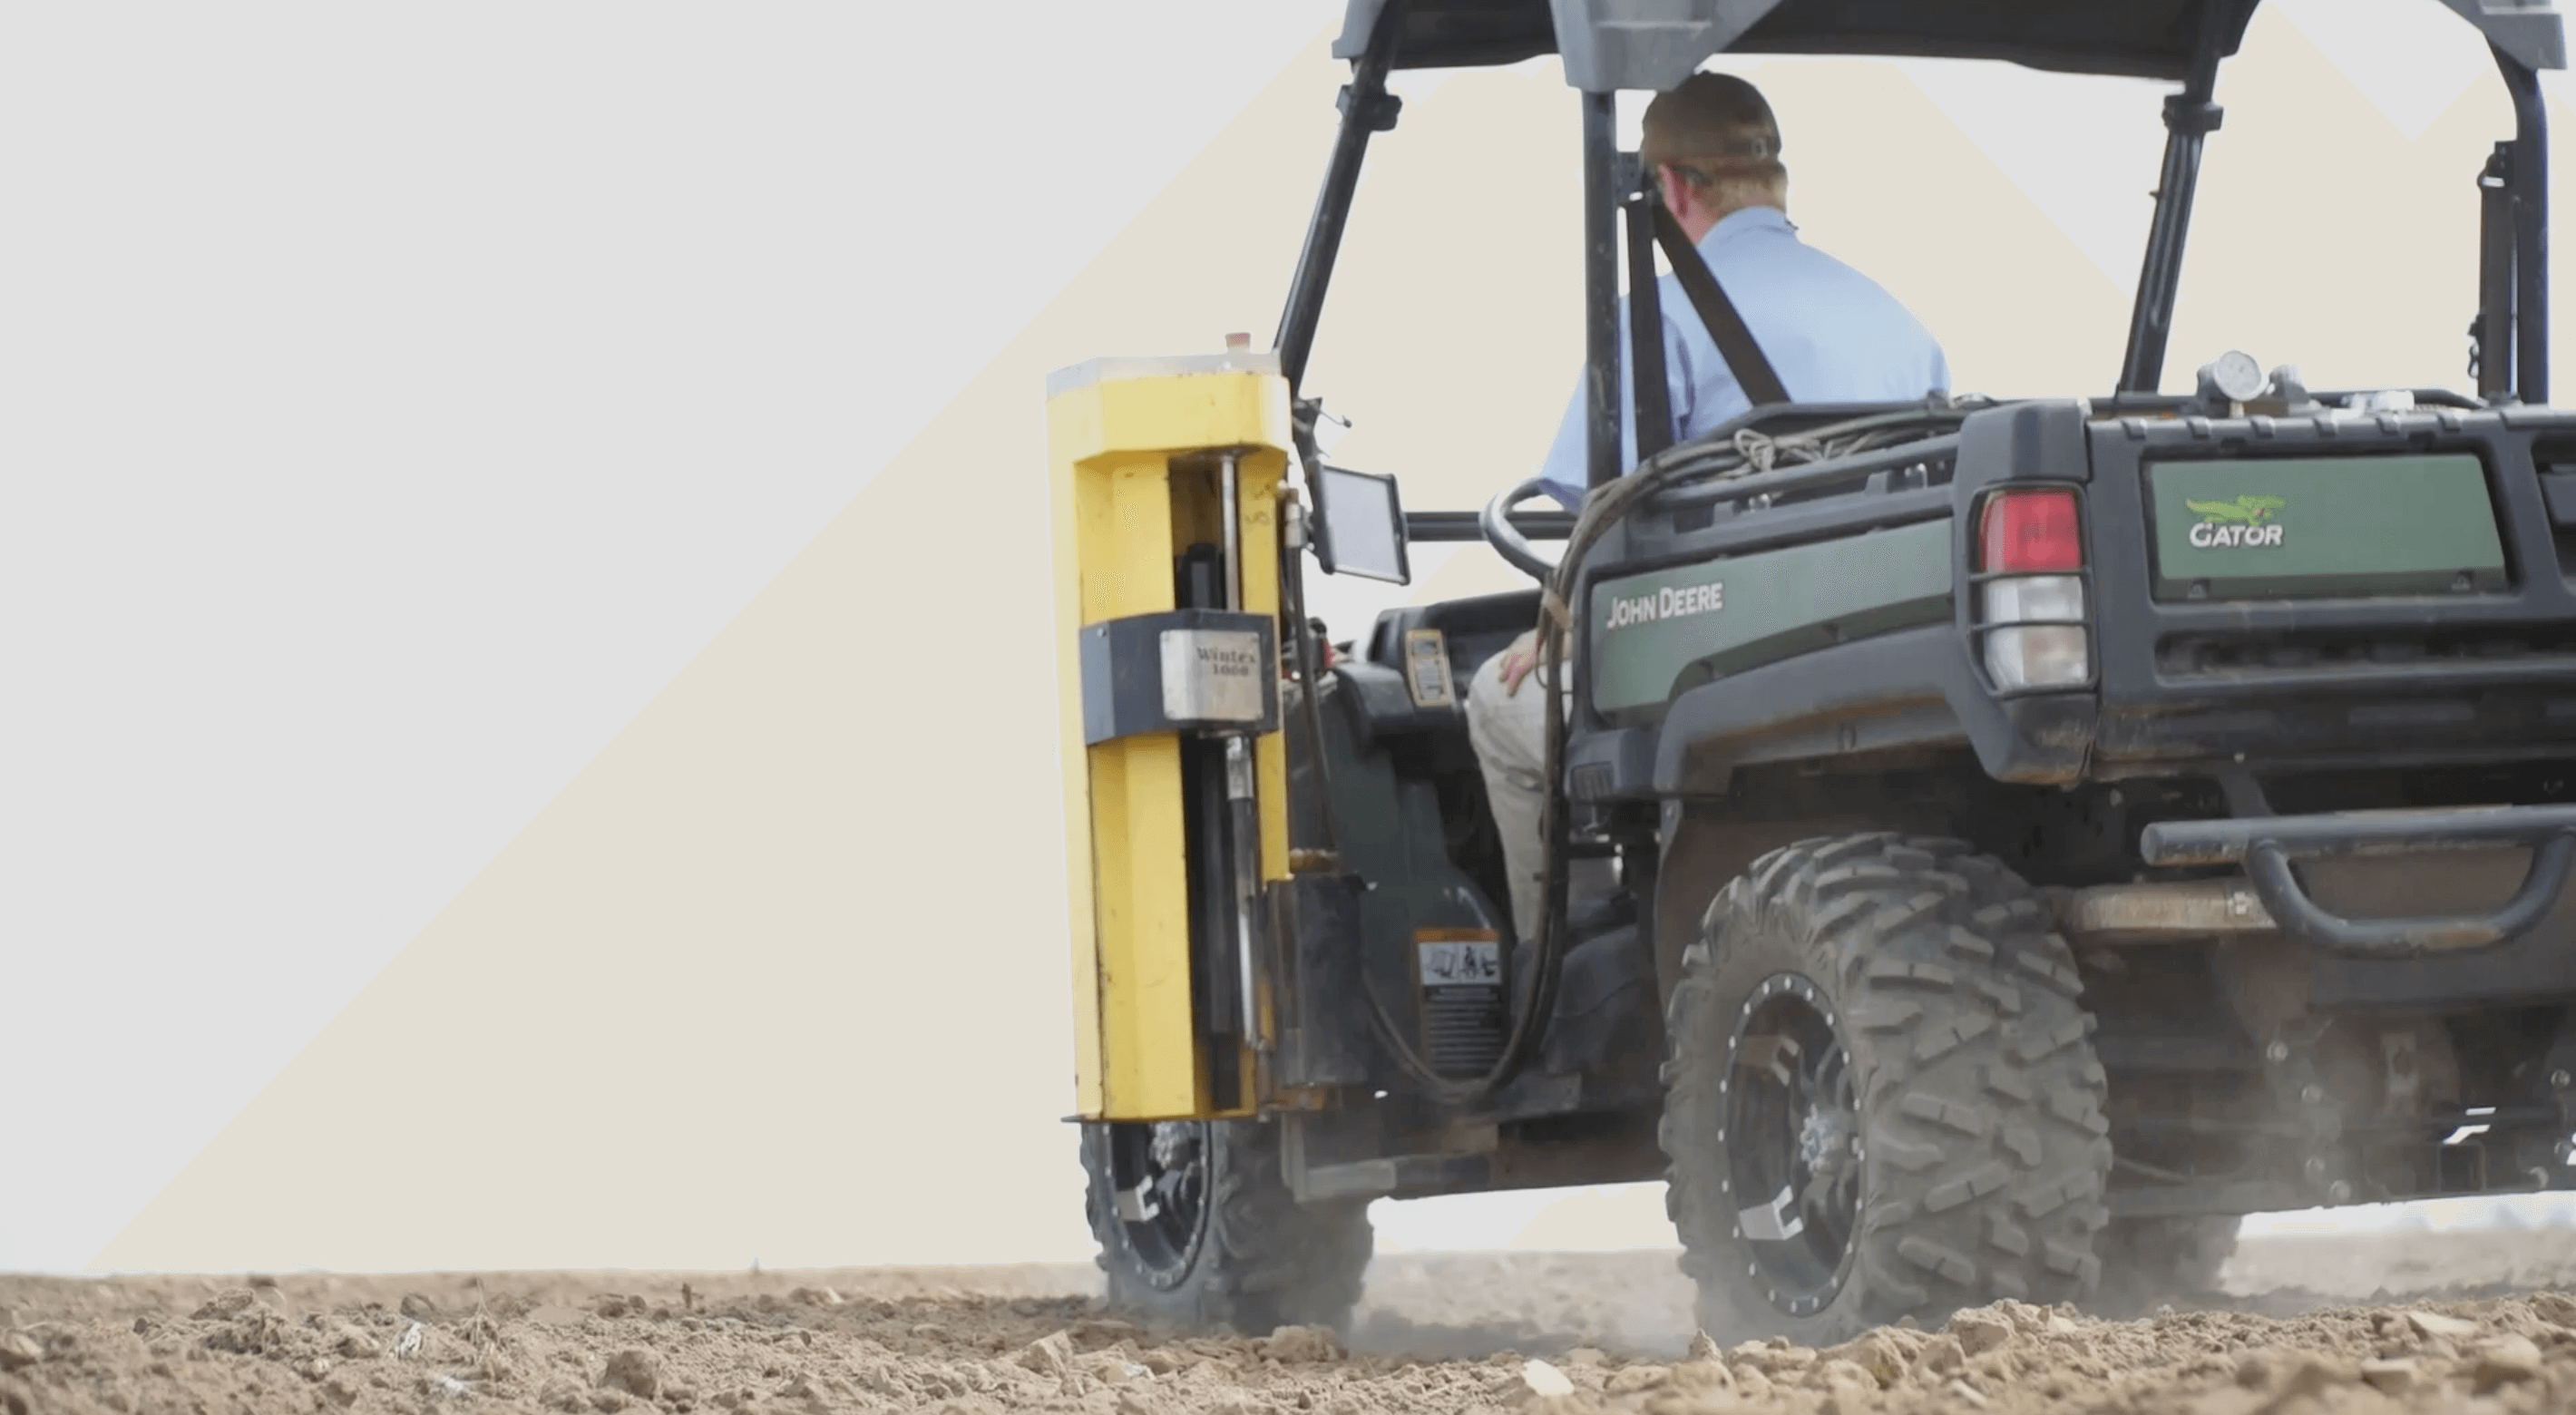 Beginning the Precision Ag Journey